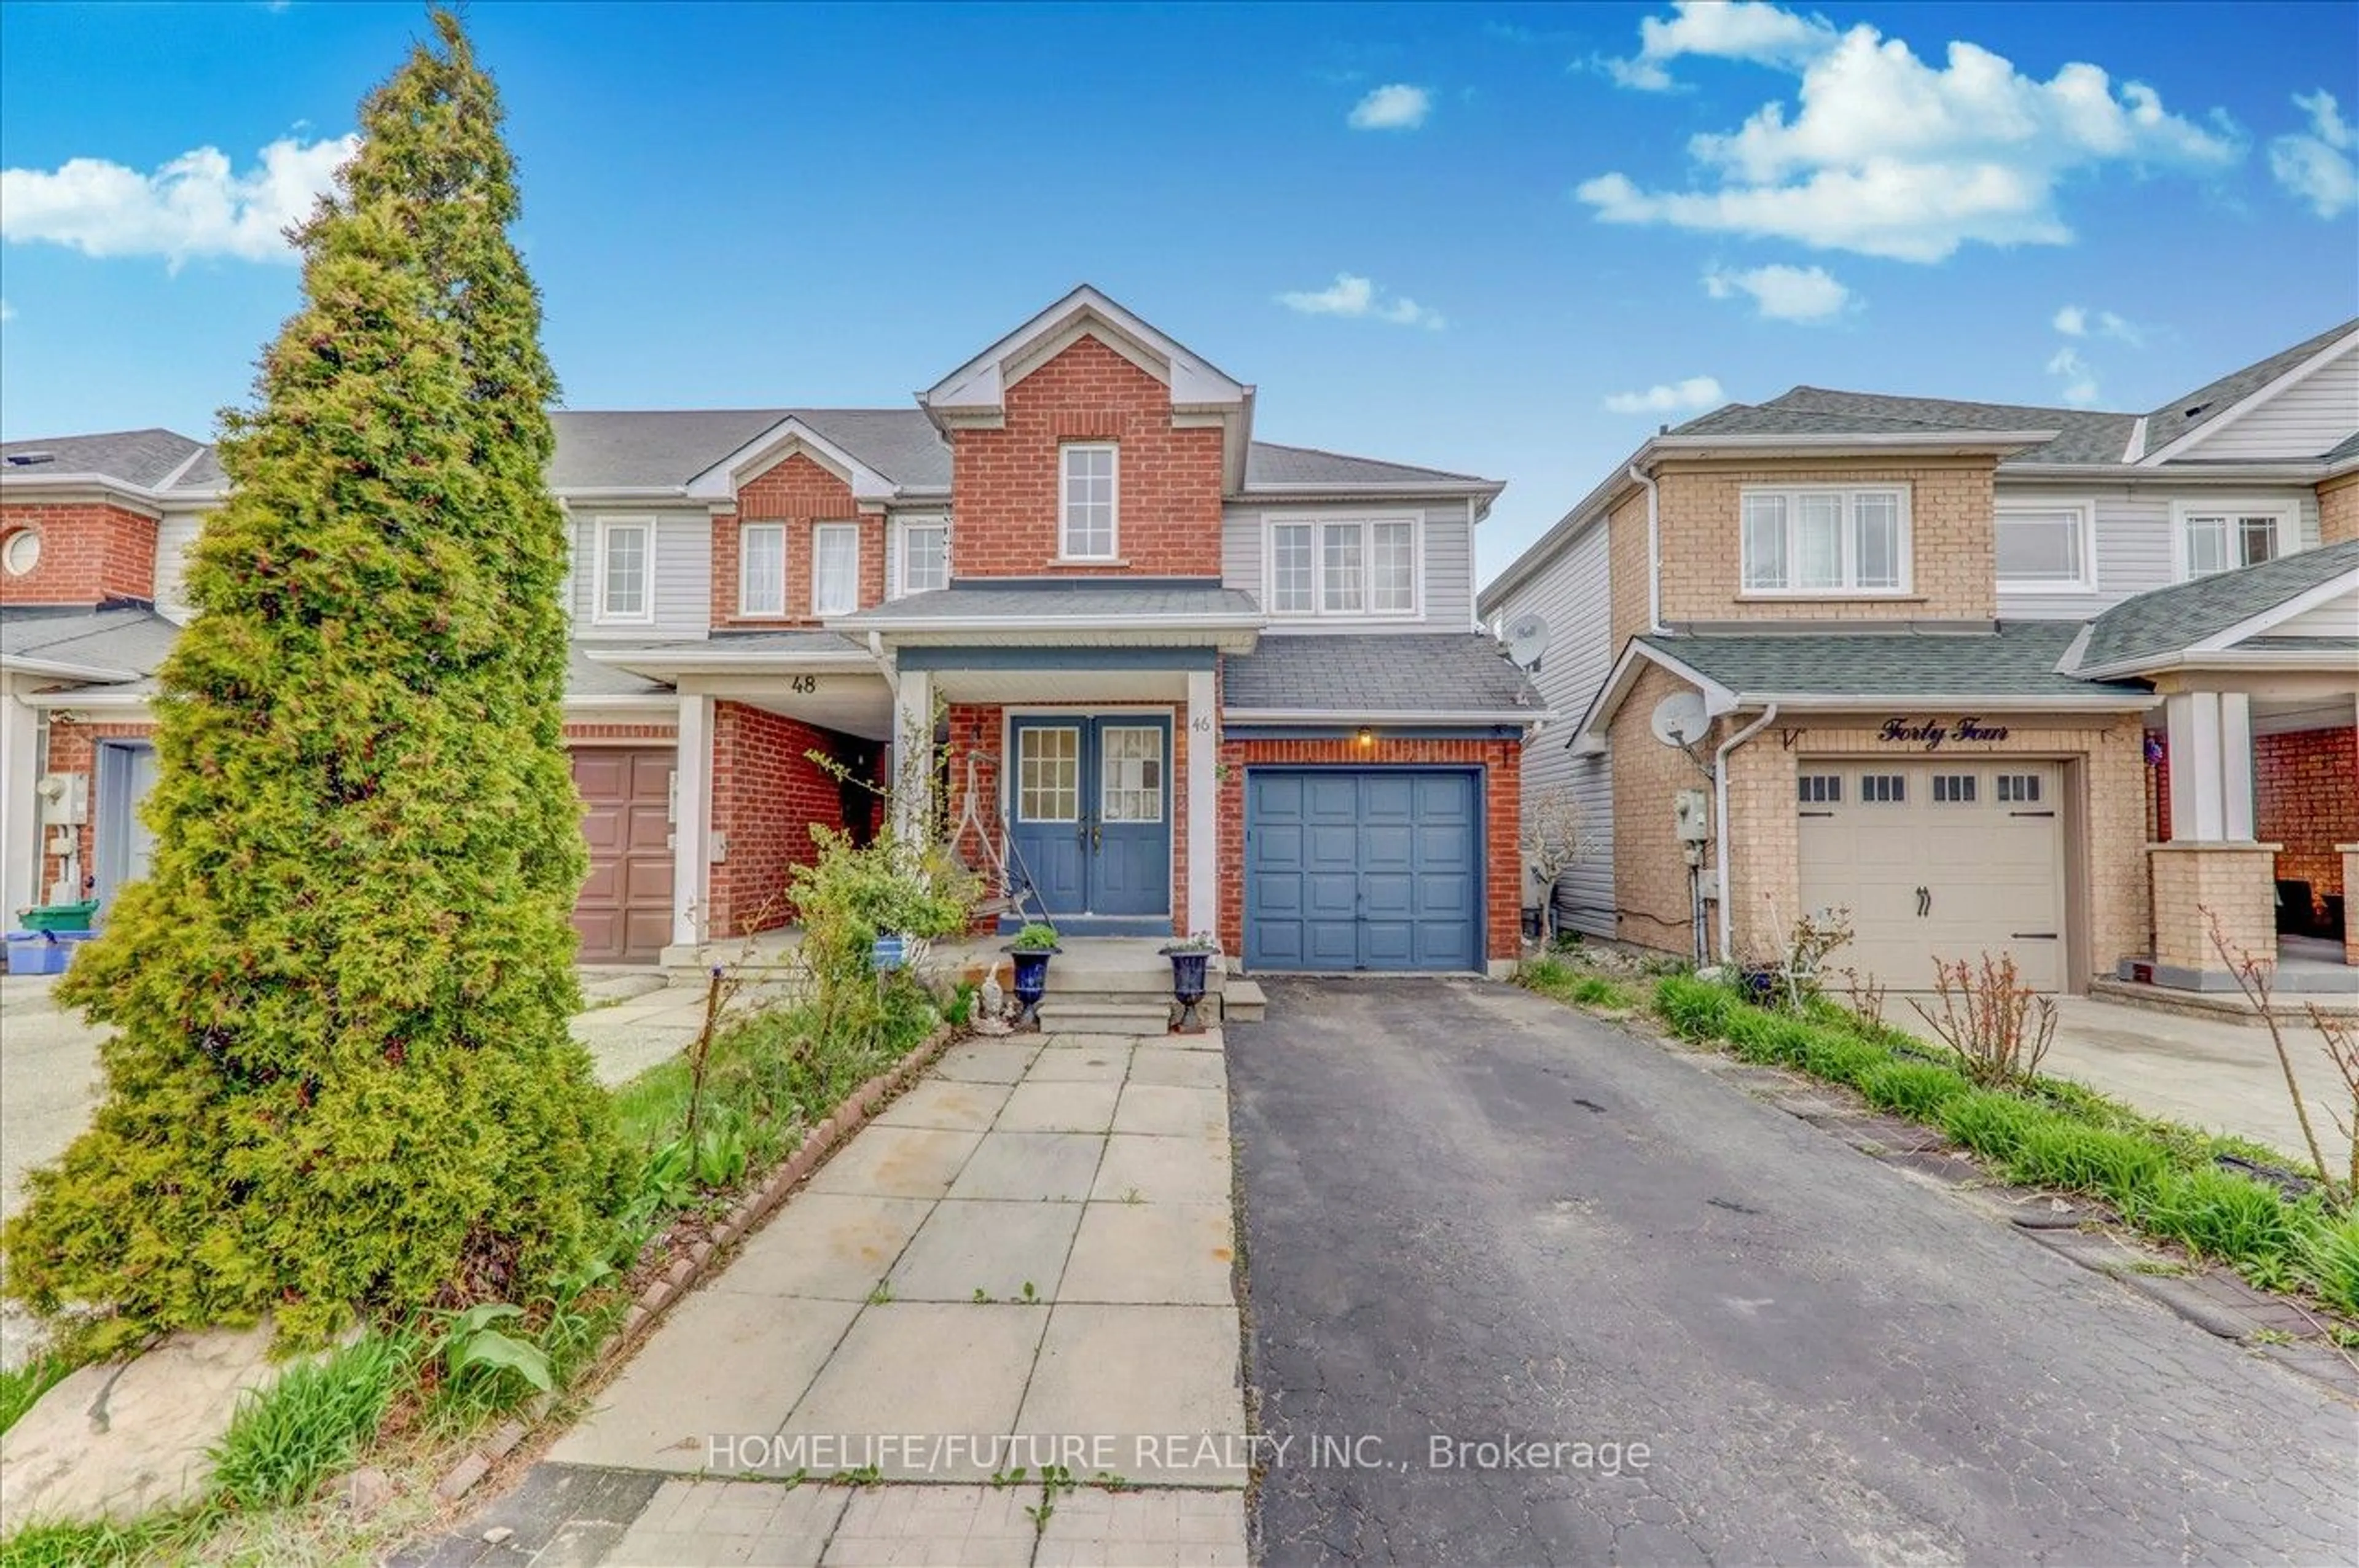 Home with brick exterior material for 46 Billingsley Cres, Markham Ontario L3S 4P1